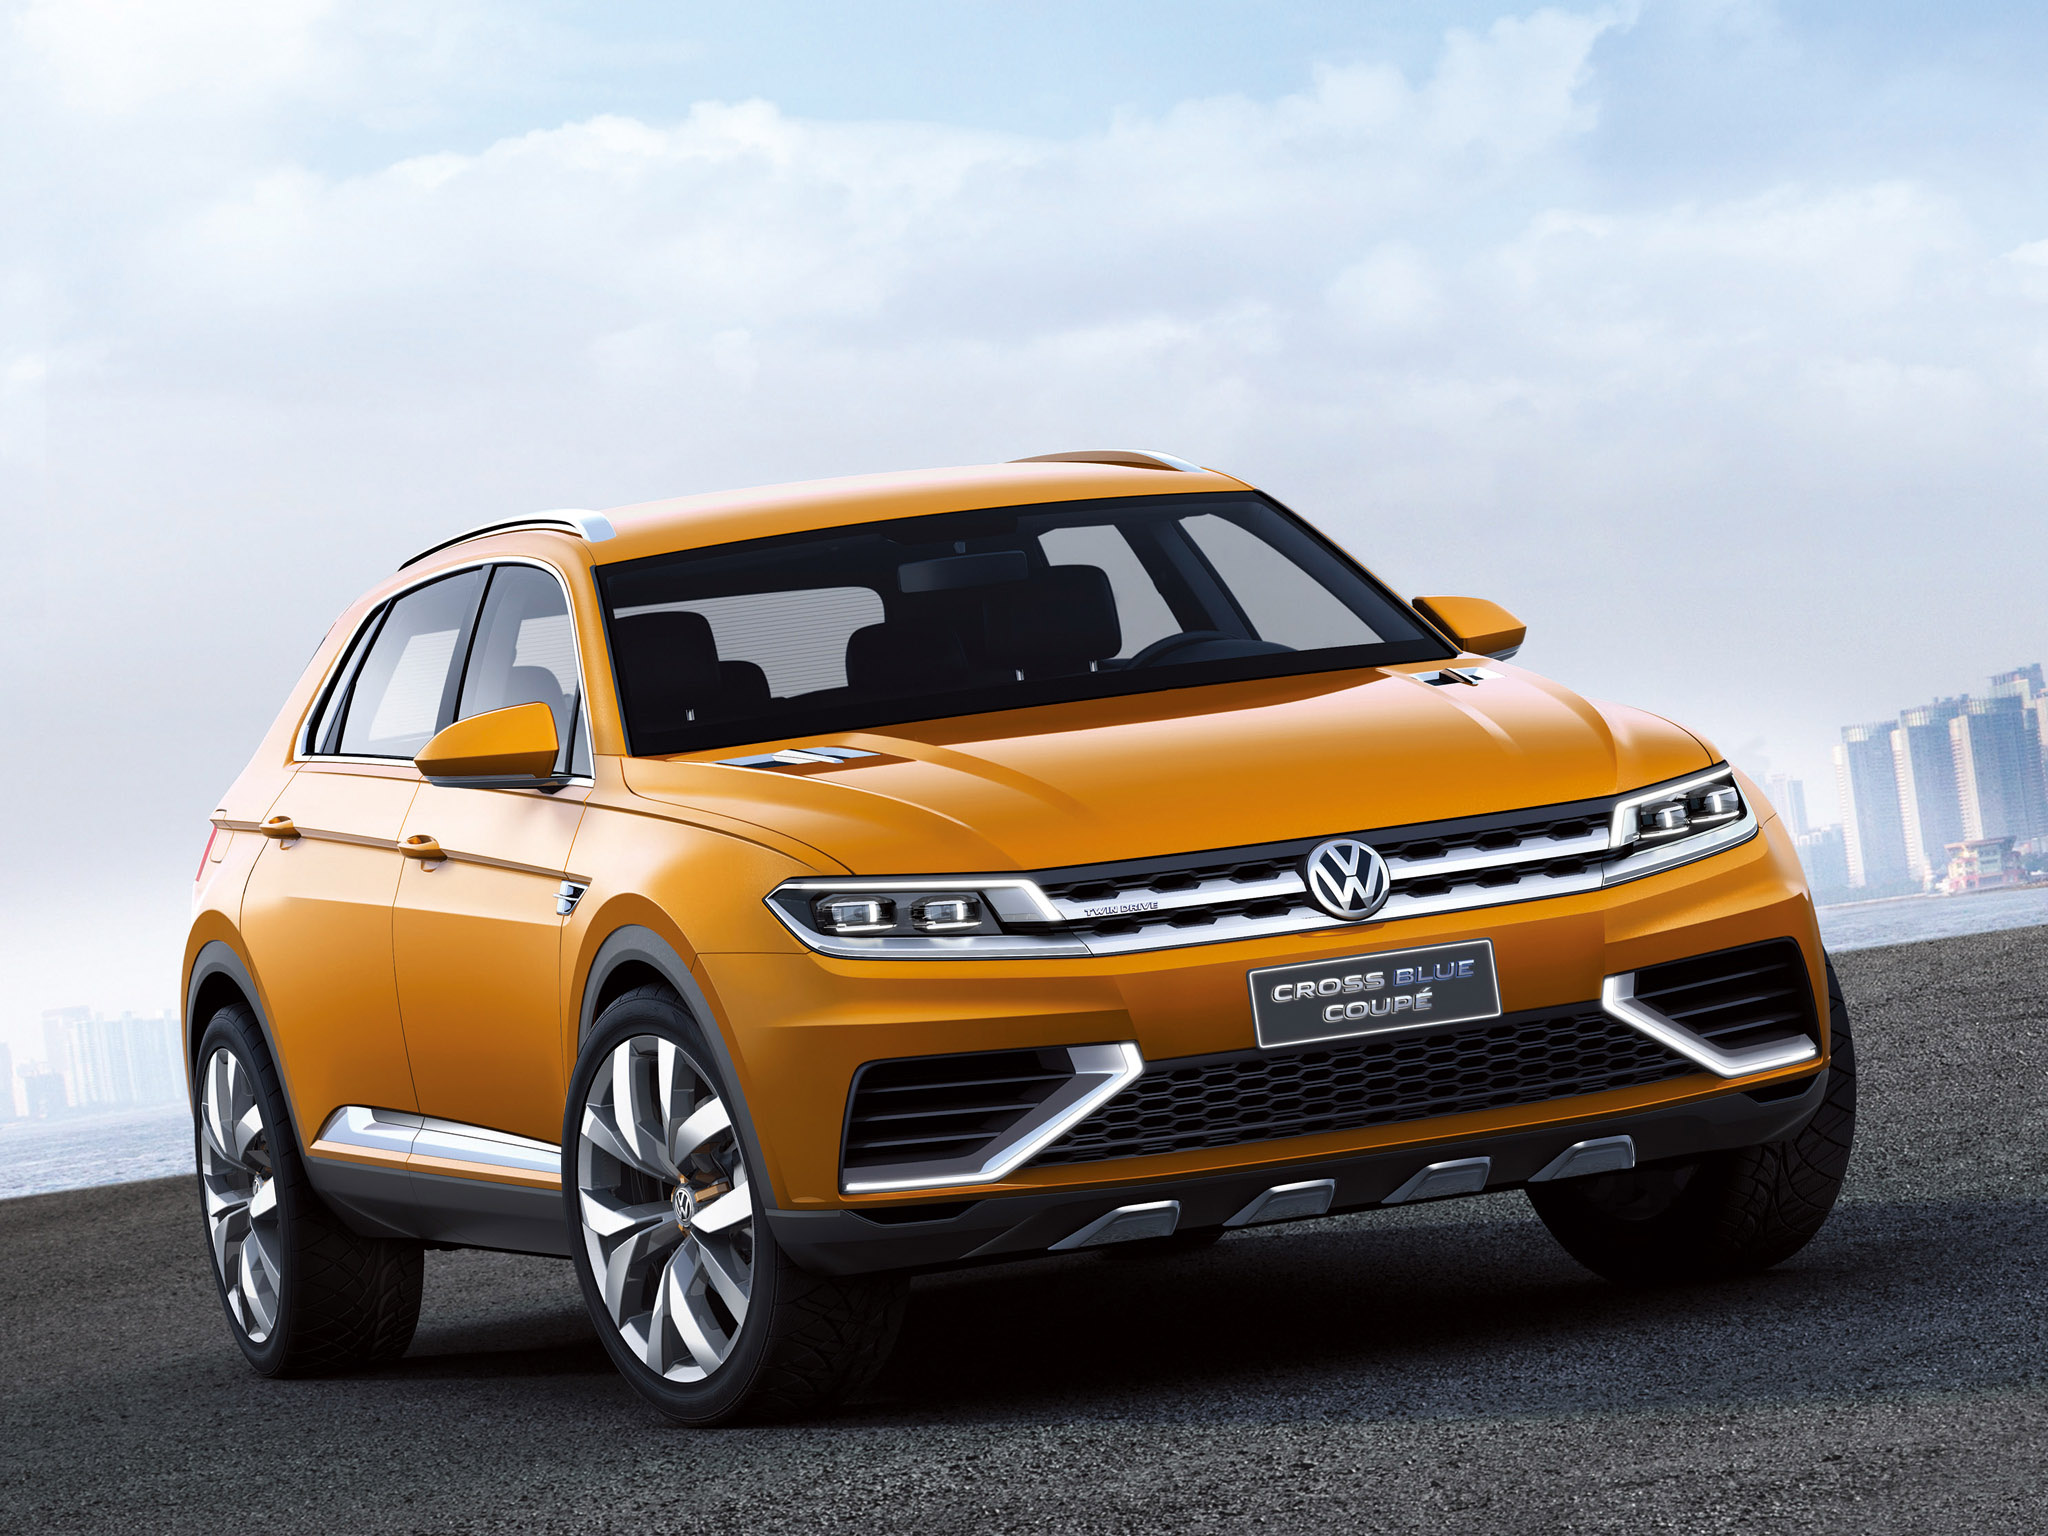 Volkswagen CrossBlue Coupe Concept photo #2